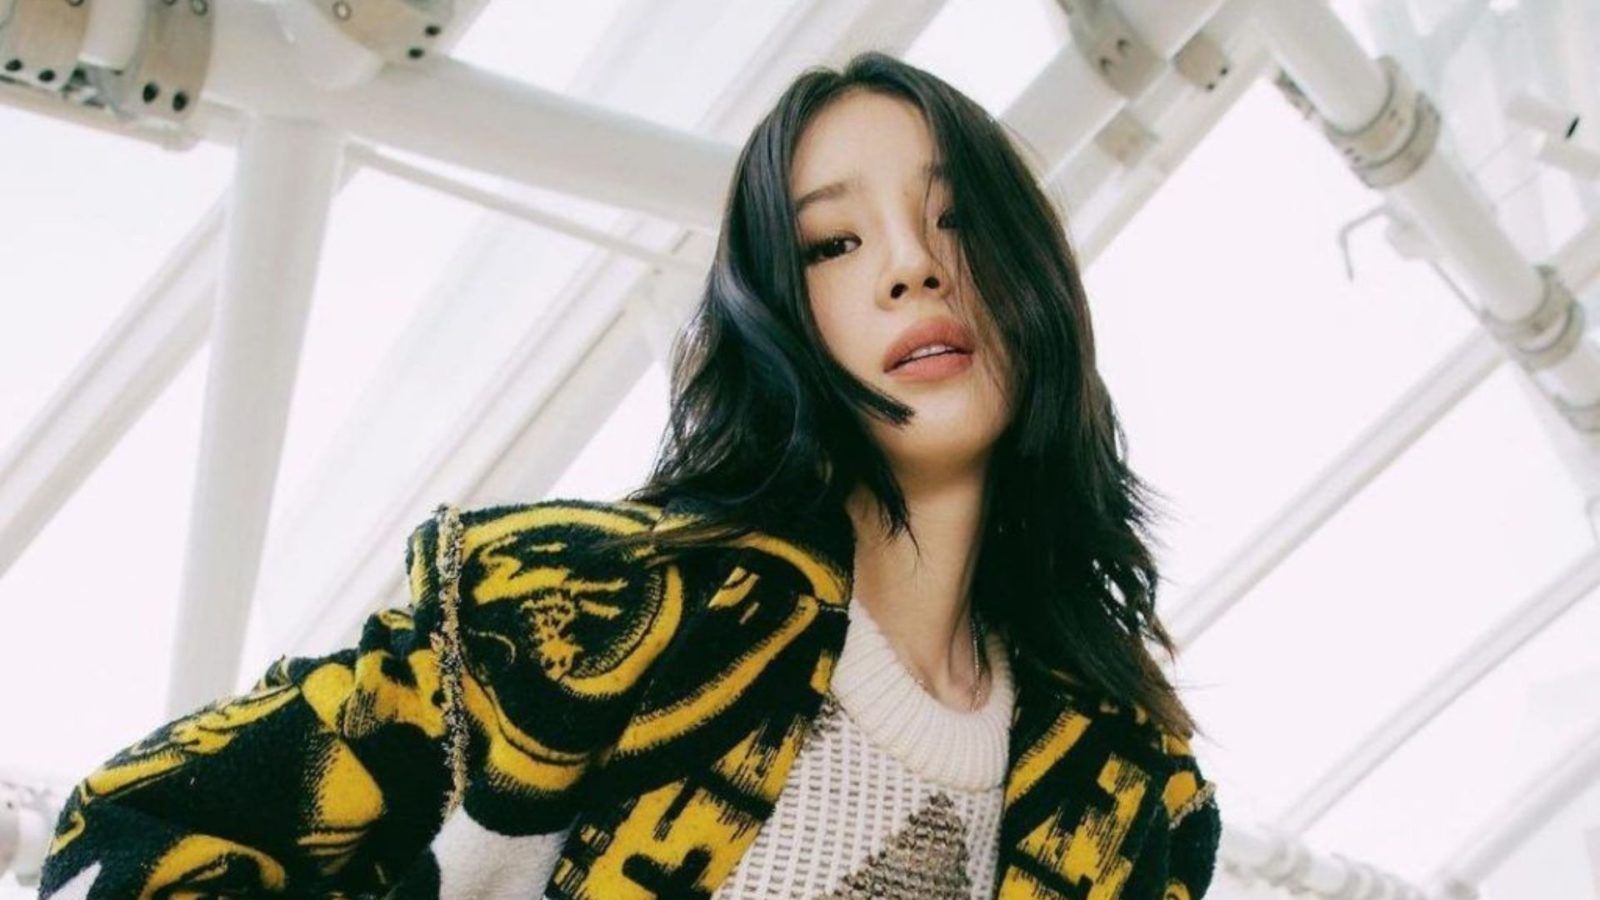 Follow these 10 Korean fashion influencers on Instagram for some style inspiration